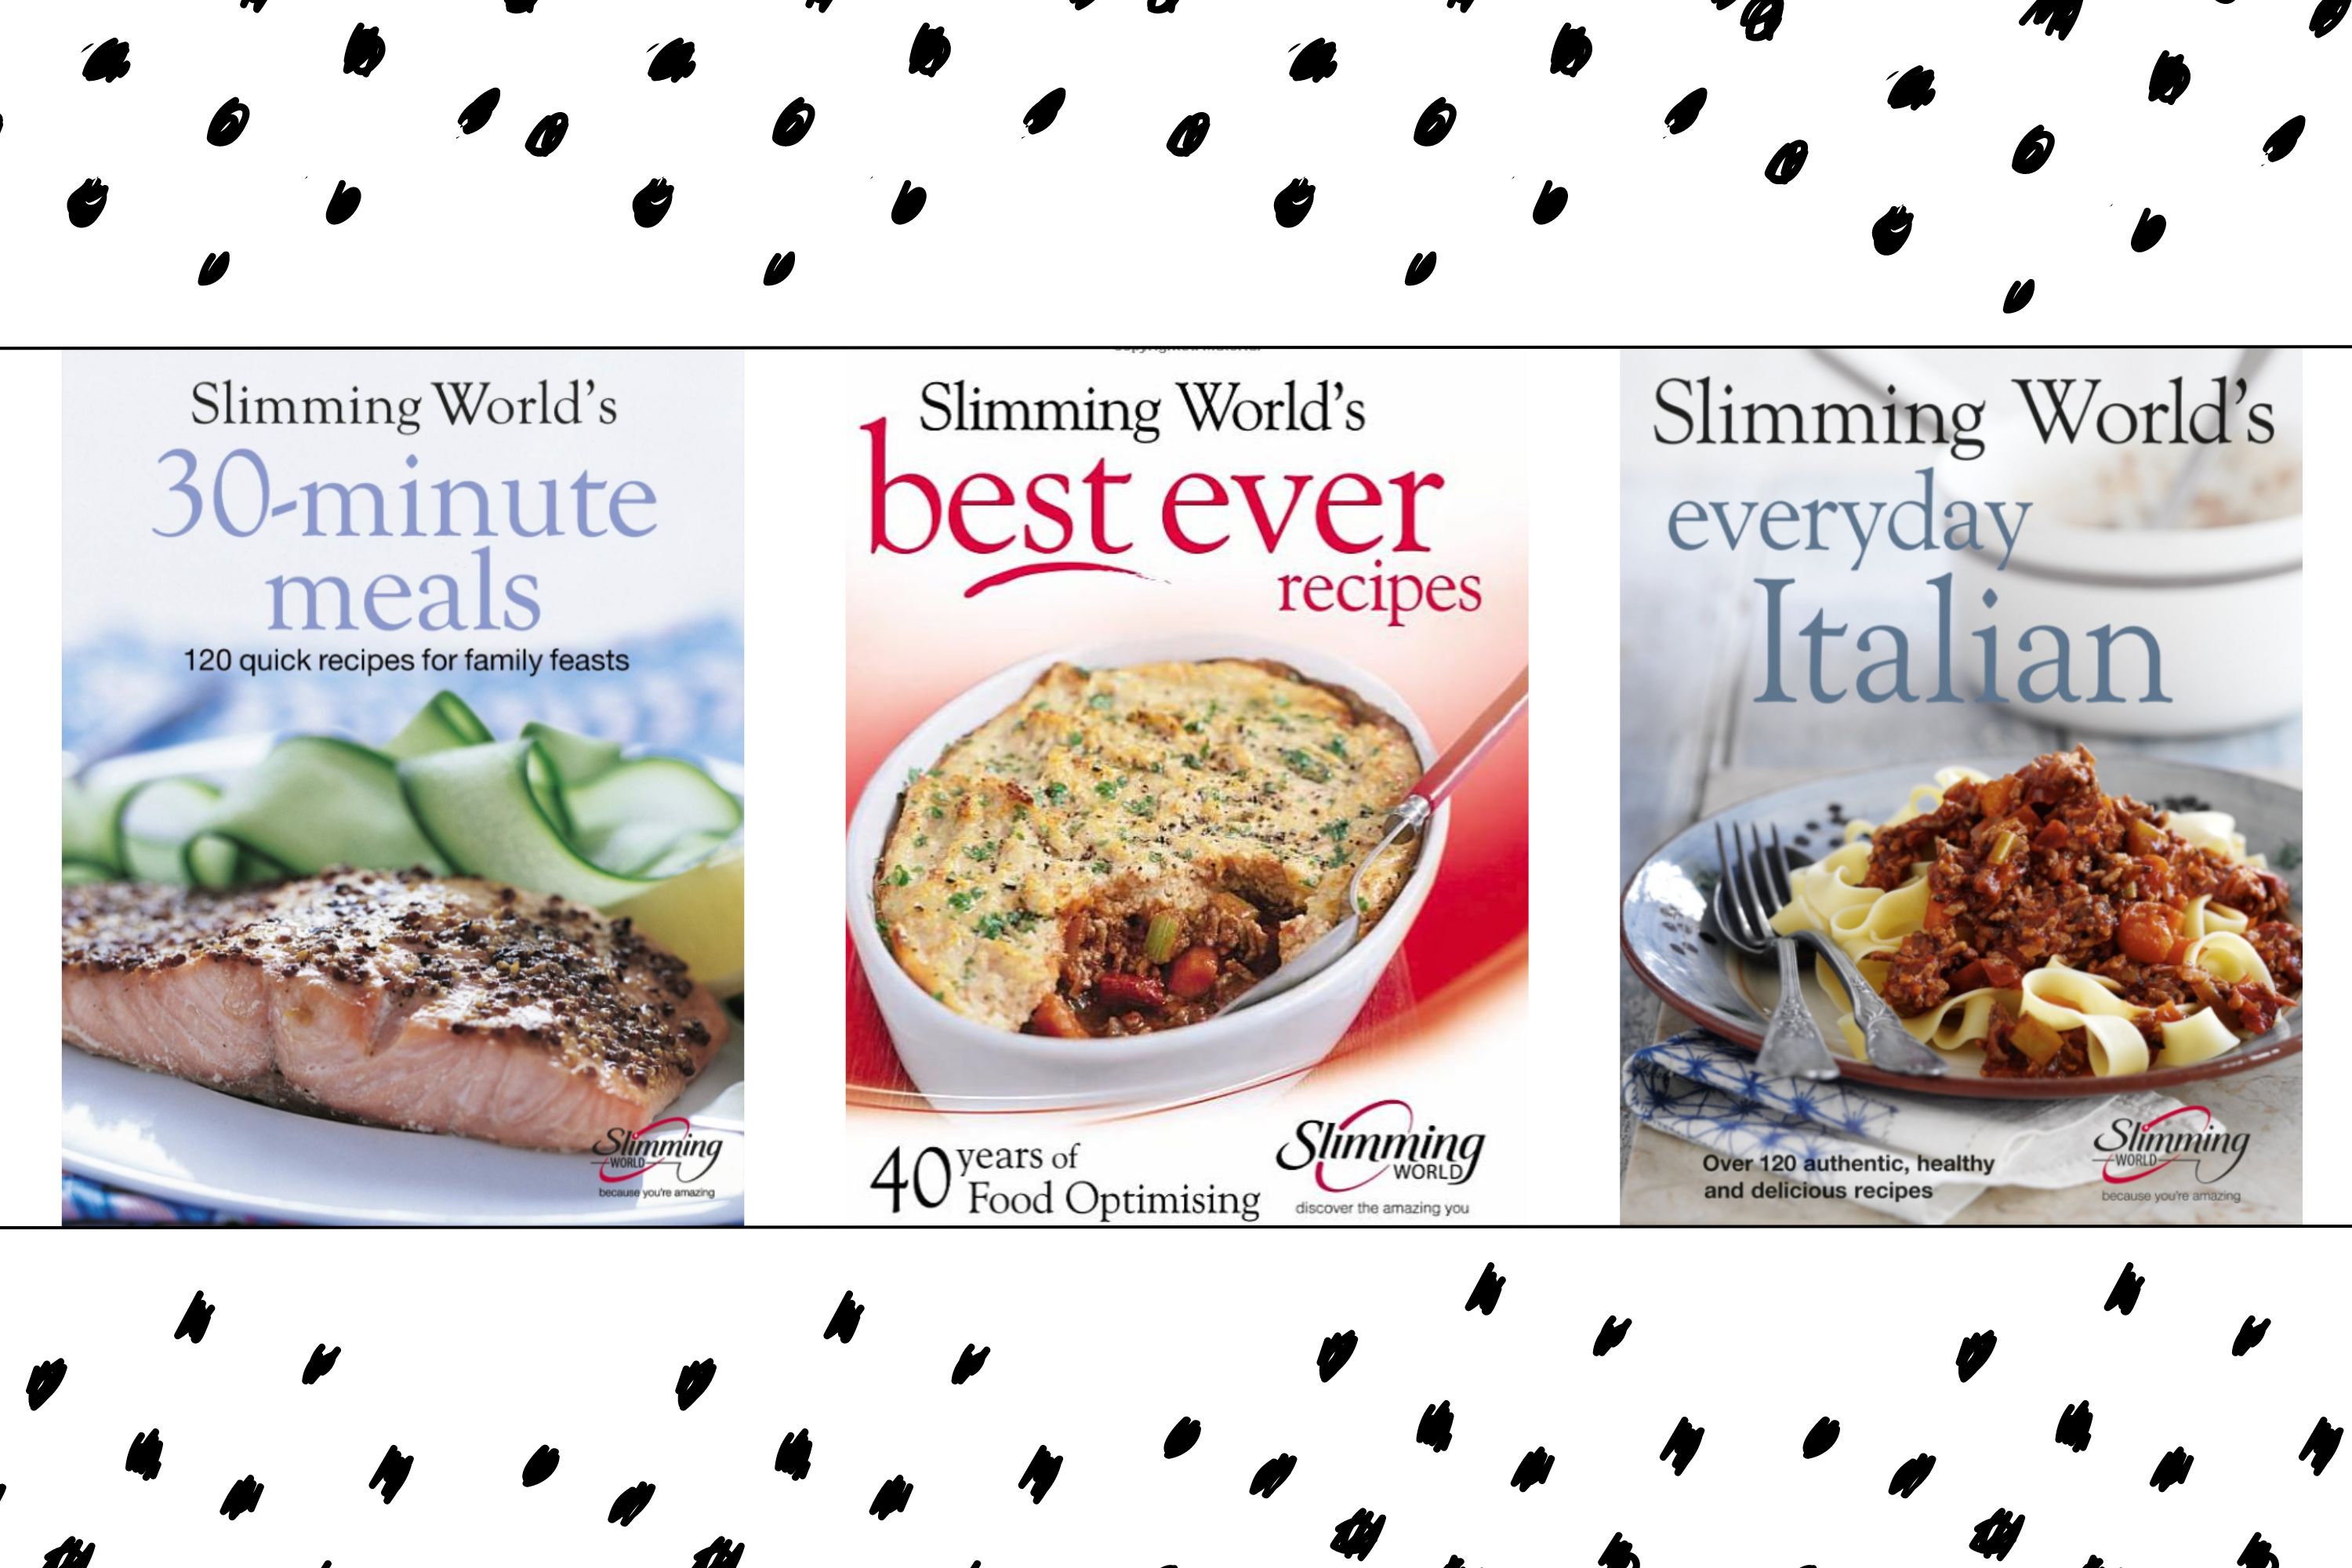 Slimming World - A Month of Easy Family Meals 48 page booklet